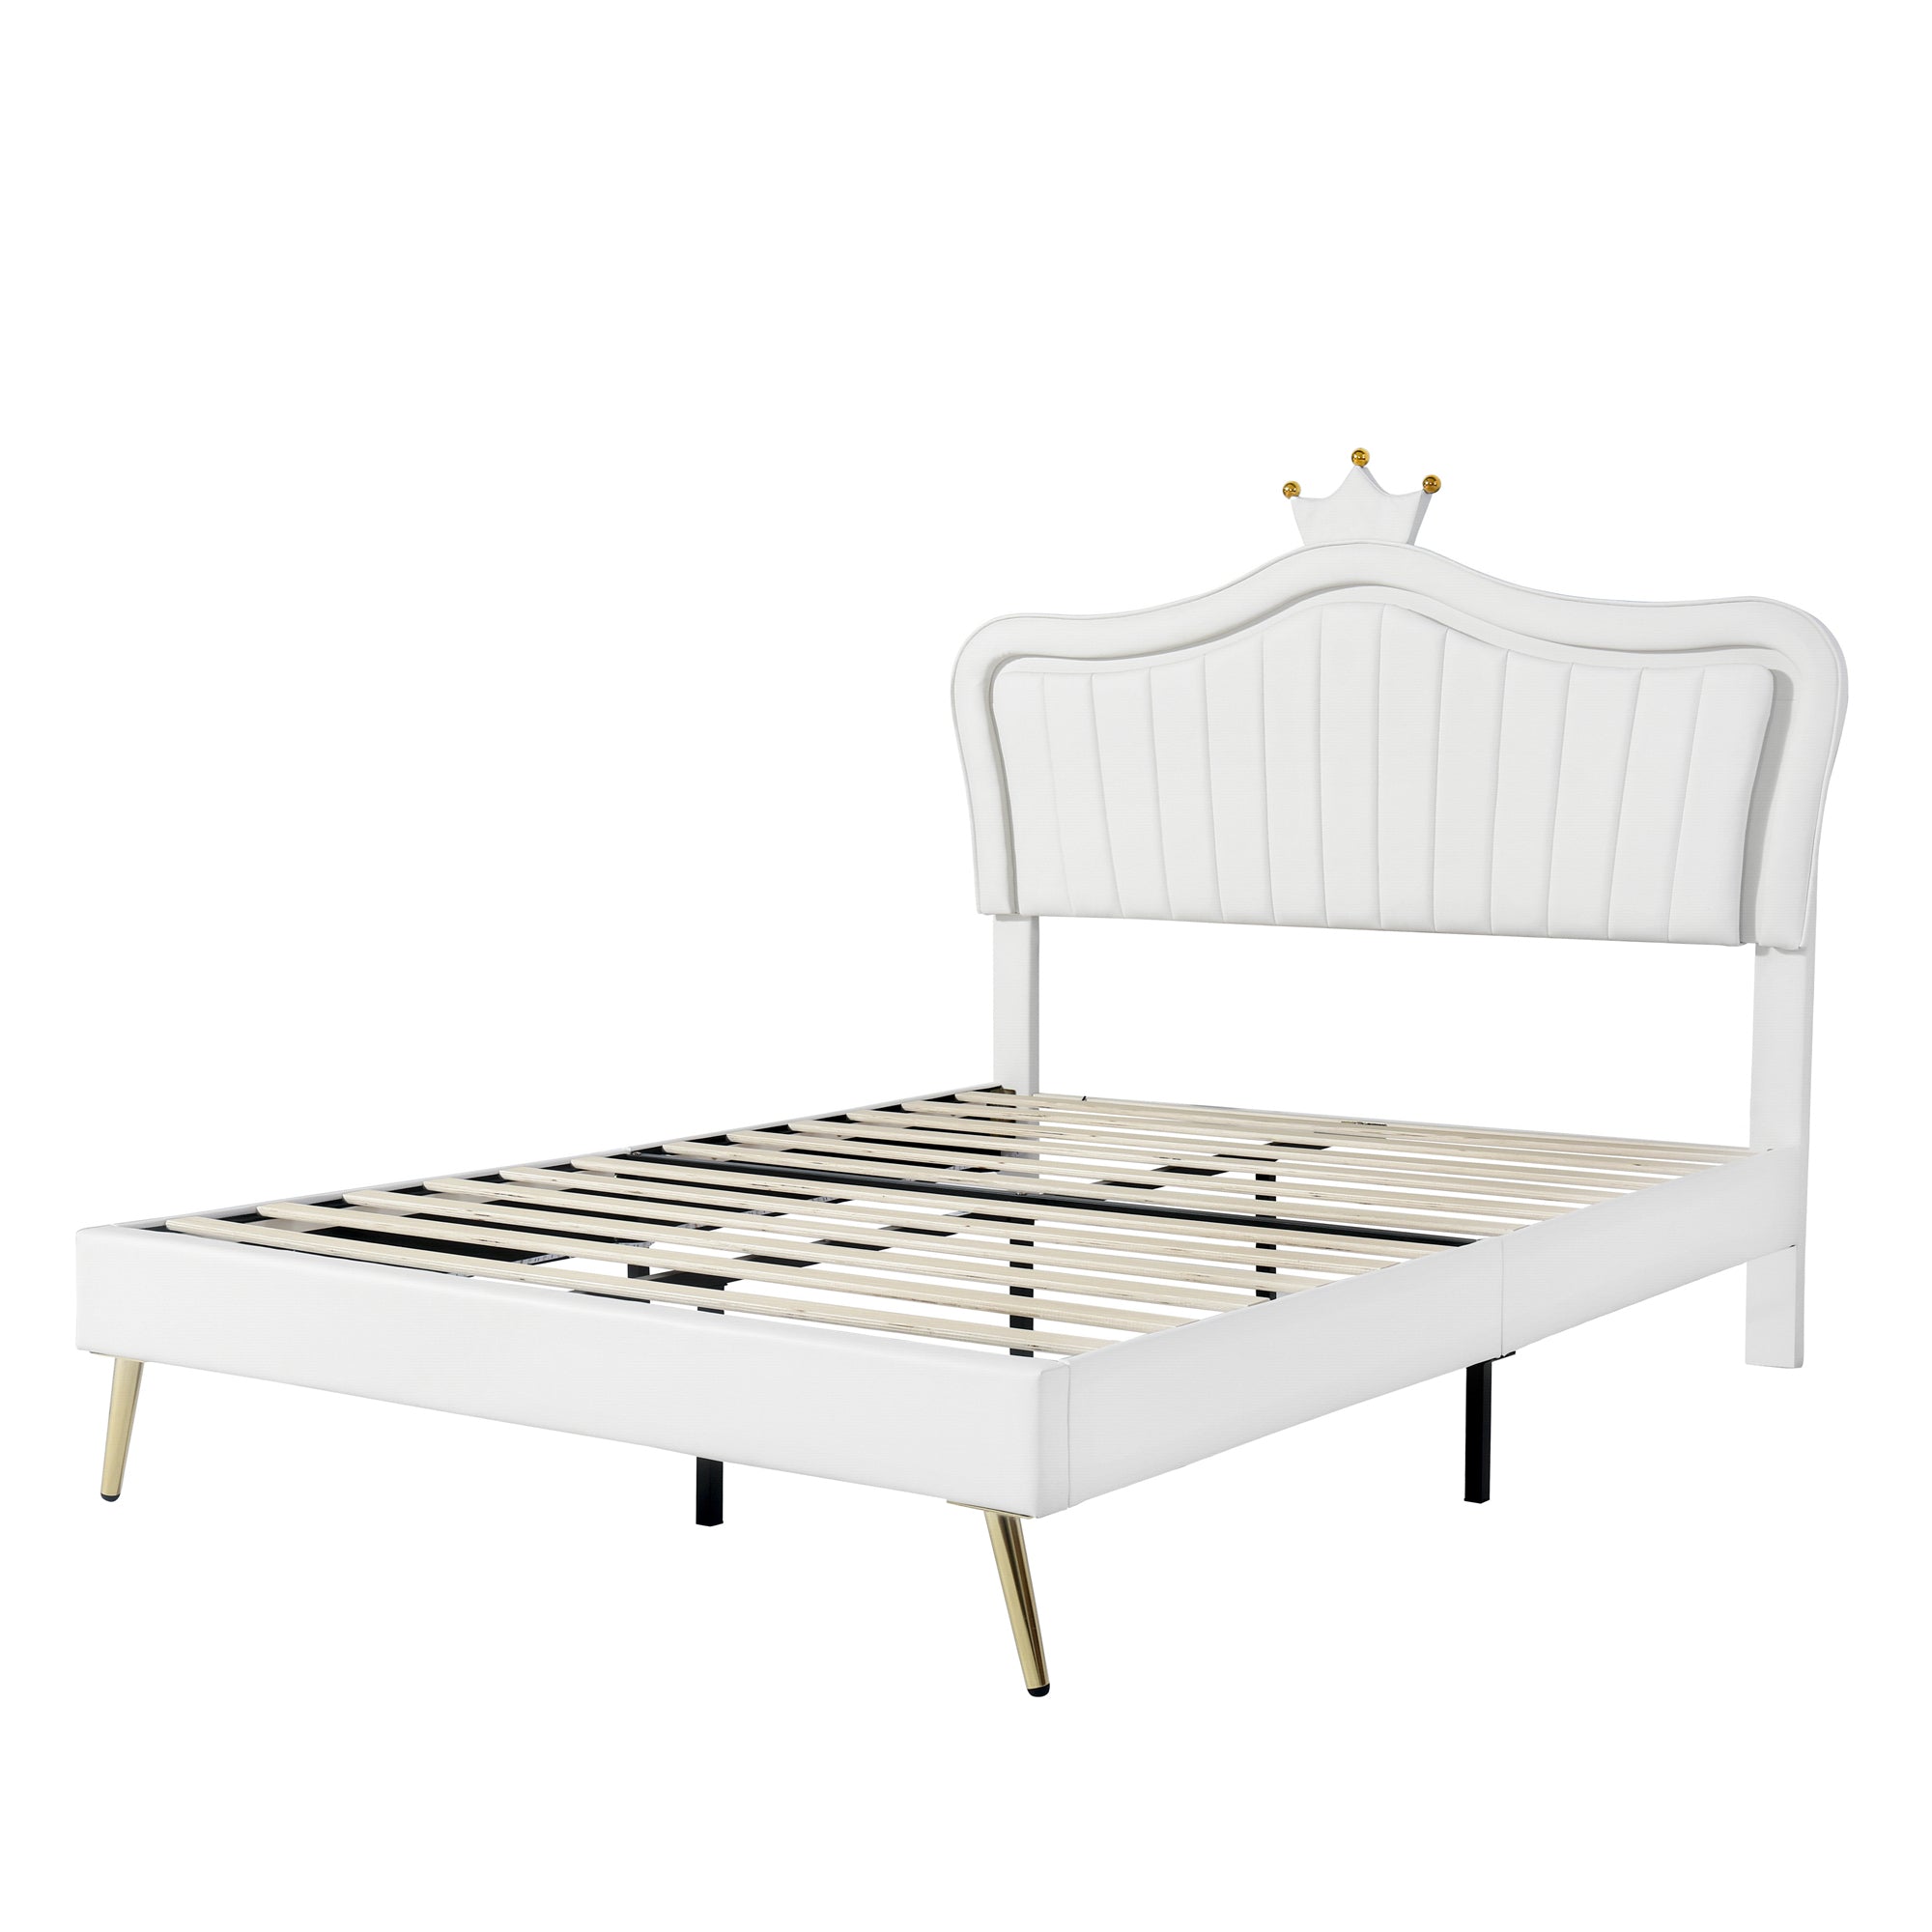 Queen Size Upholstered Bed Frame with LED Lights, Modern Upholstered Princess Bed With Crown Headboard